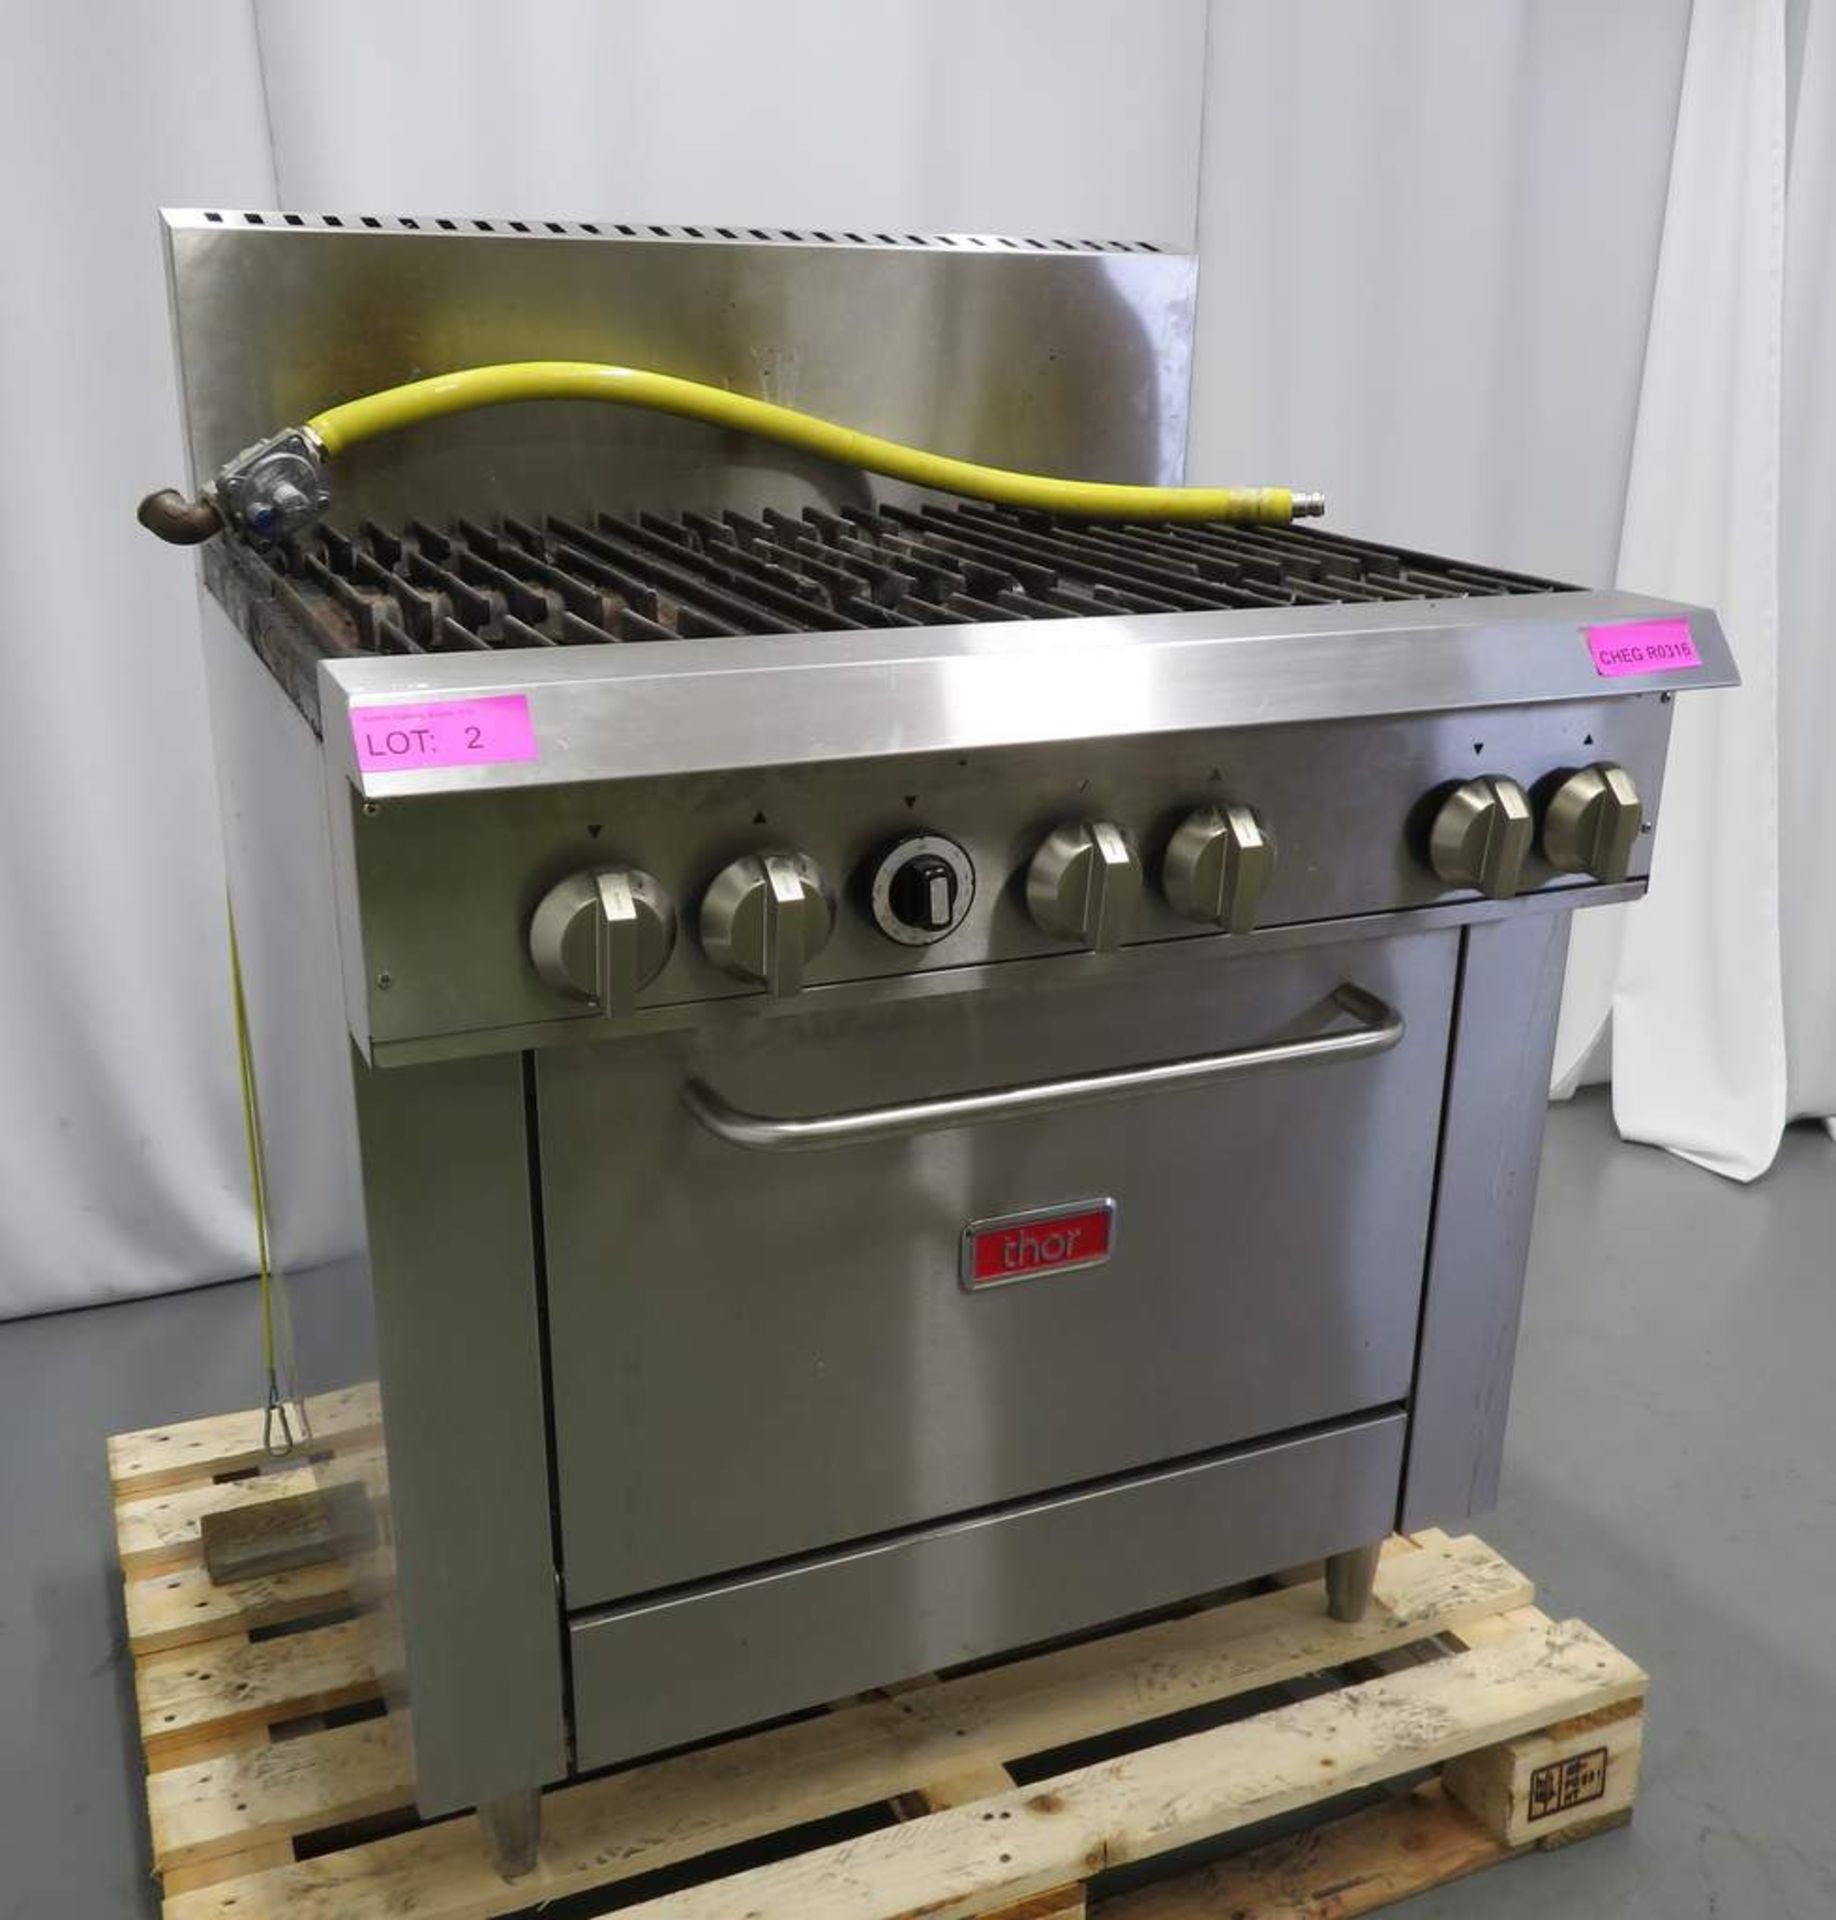 Thor 6 Ring Gas Range Oven 36". Natural Gas. Model: TR-6F.